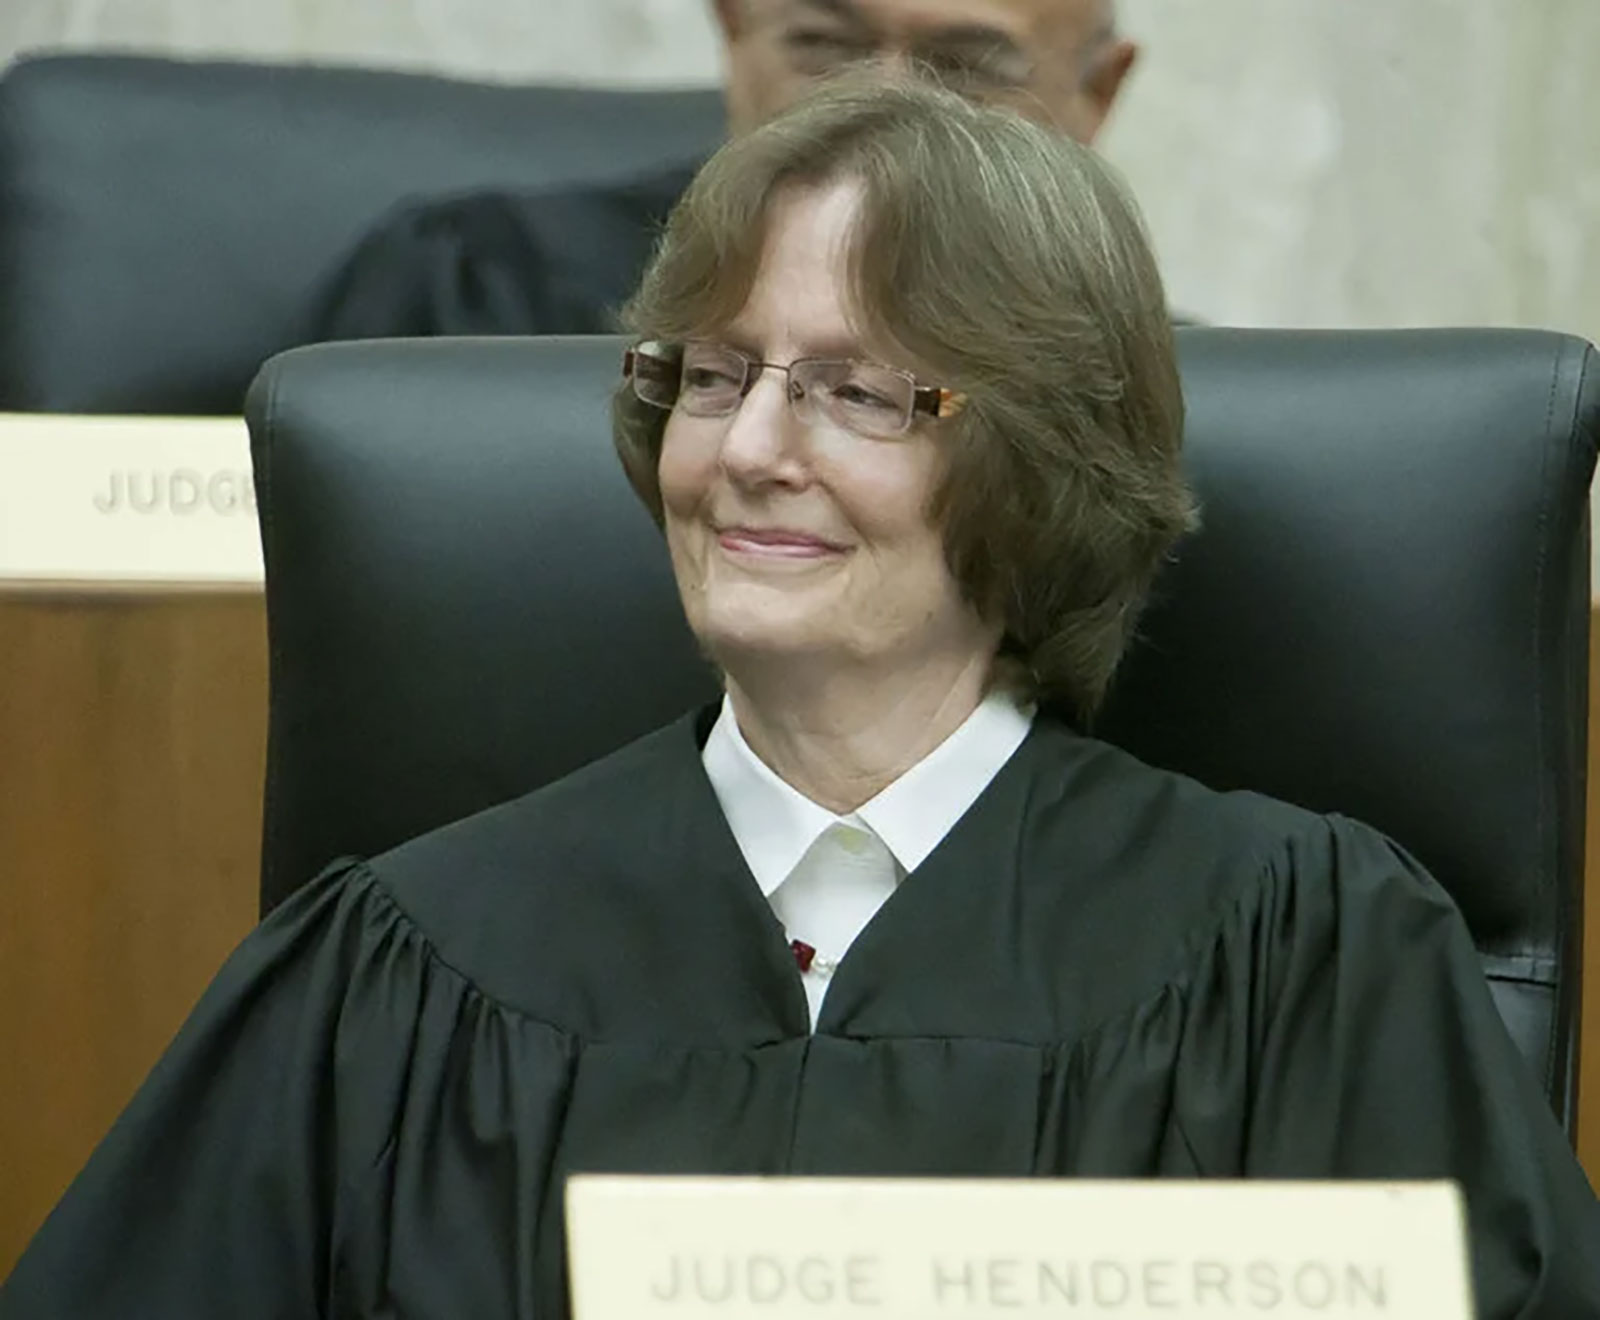 Judge Karen LeCraft Henderson, of the US Court of Appeals for the District of Columbia Circuit.